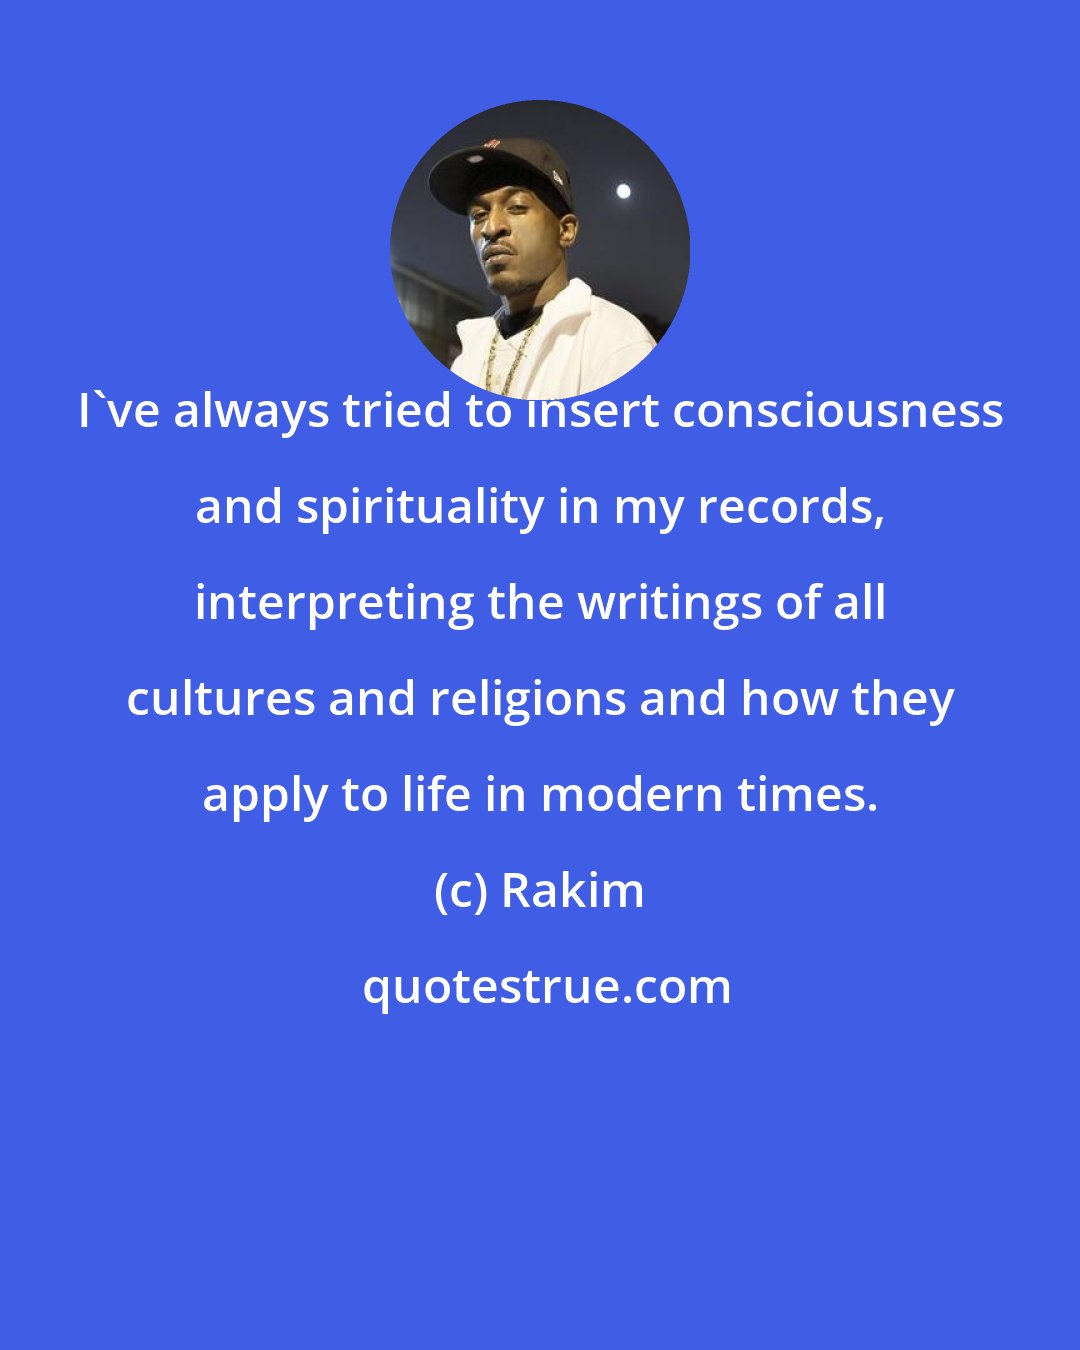 Rakim: I've always tried to insert consciousness and spirituality in my records, interpreting the writings of all cultures and religions and how they apply to life in modern times.